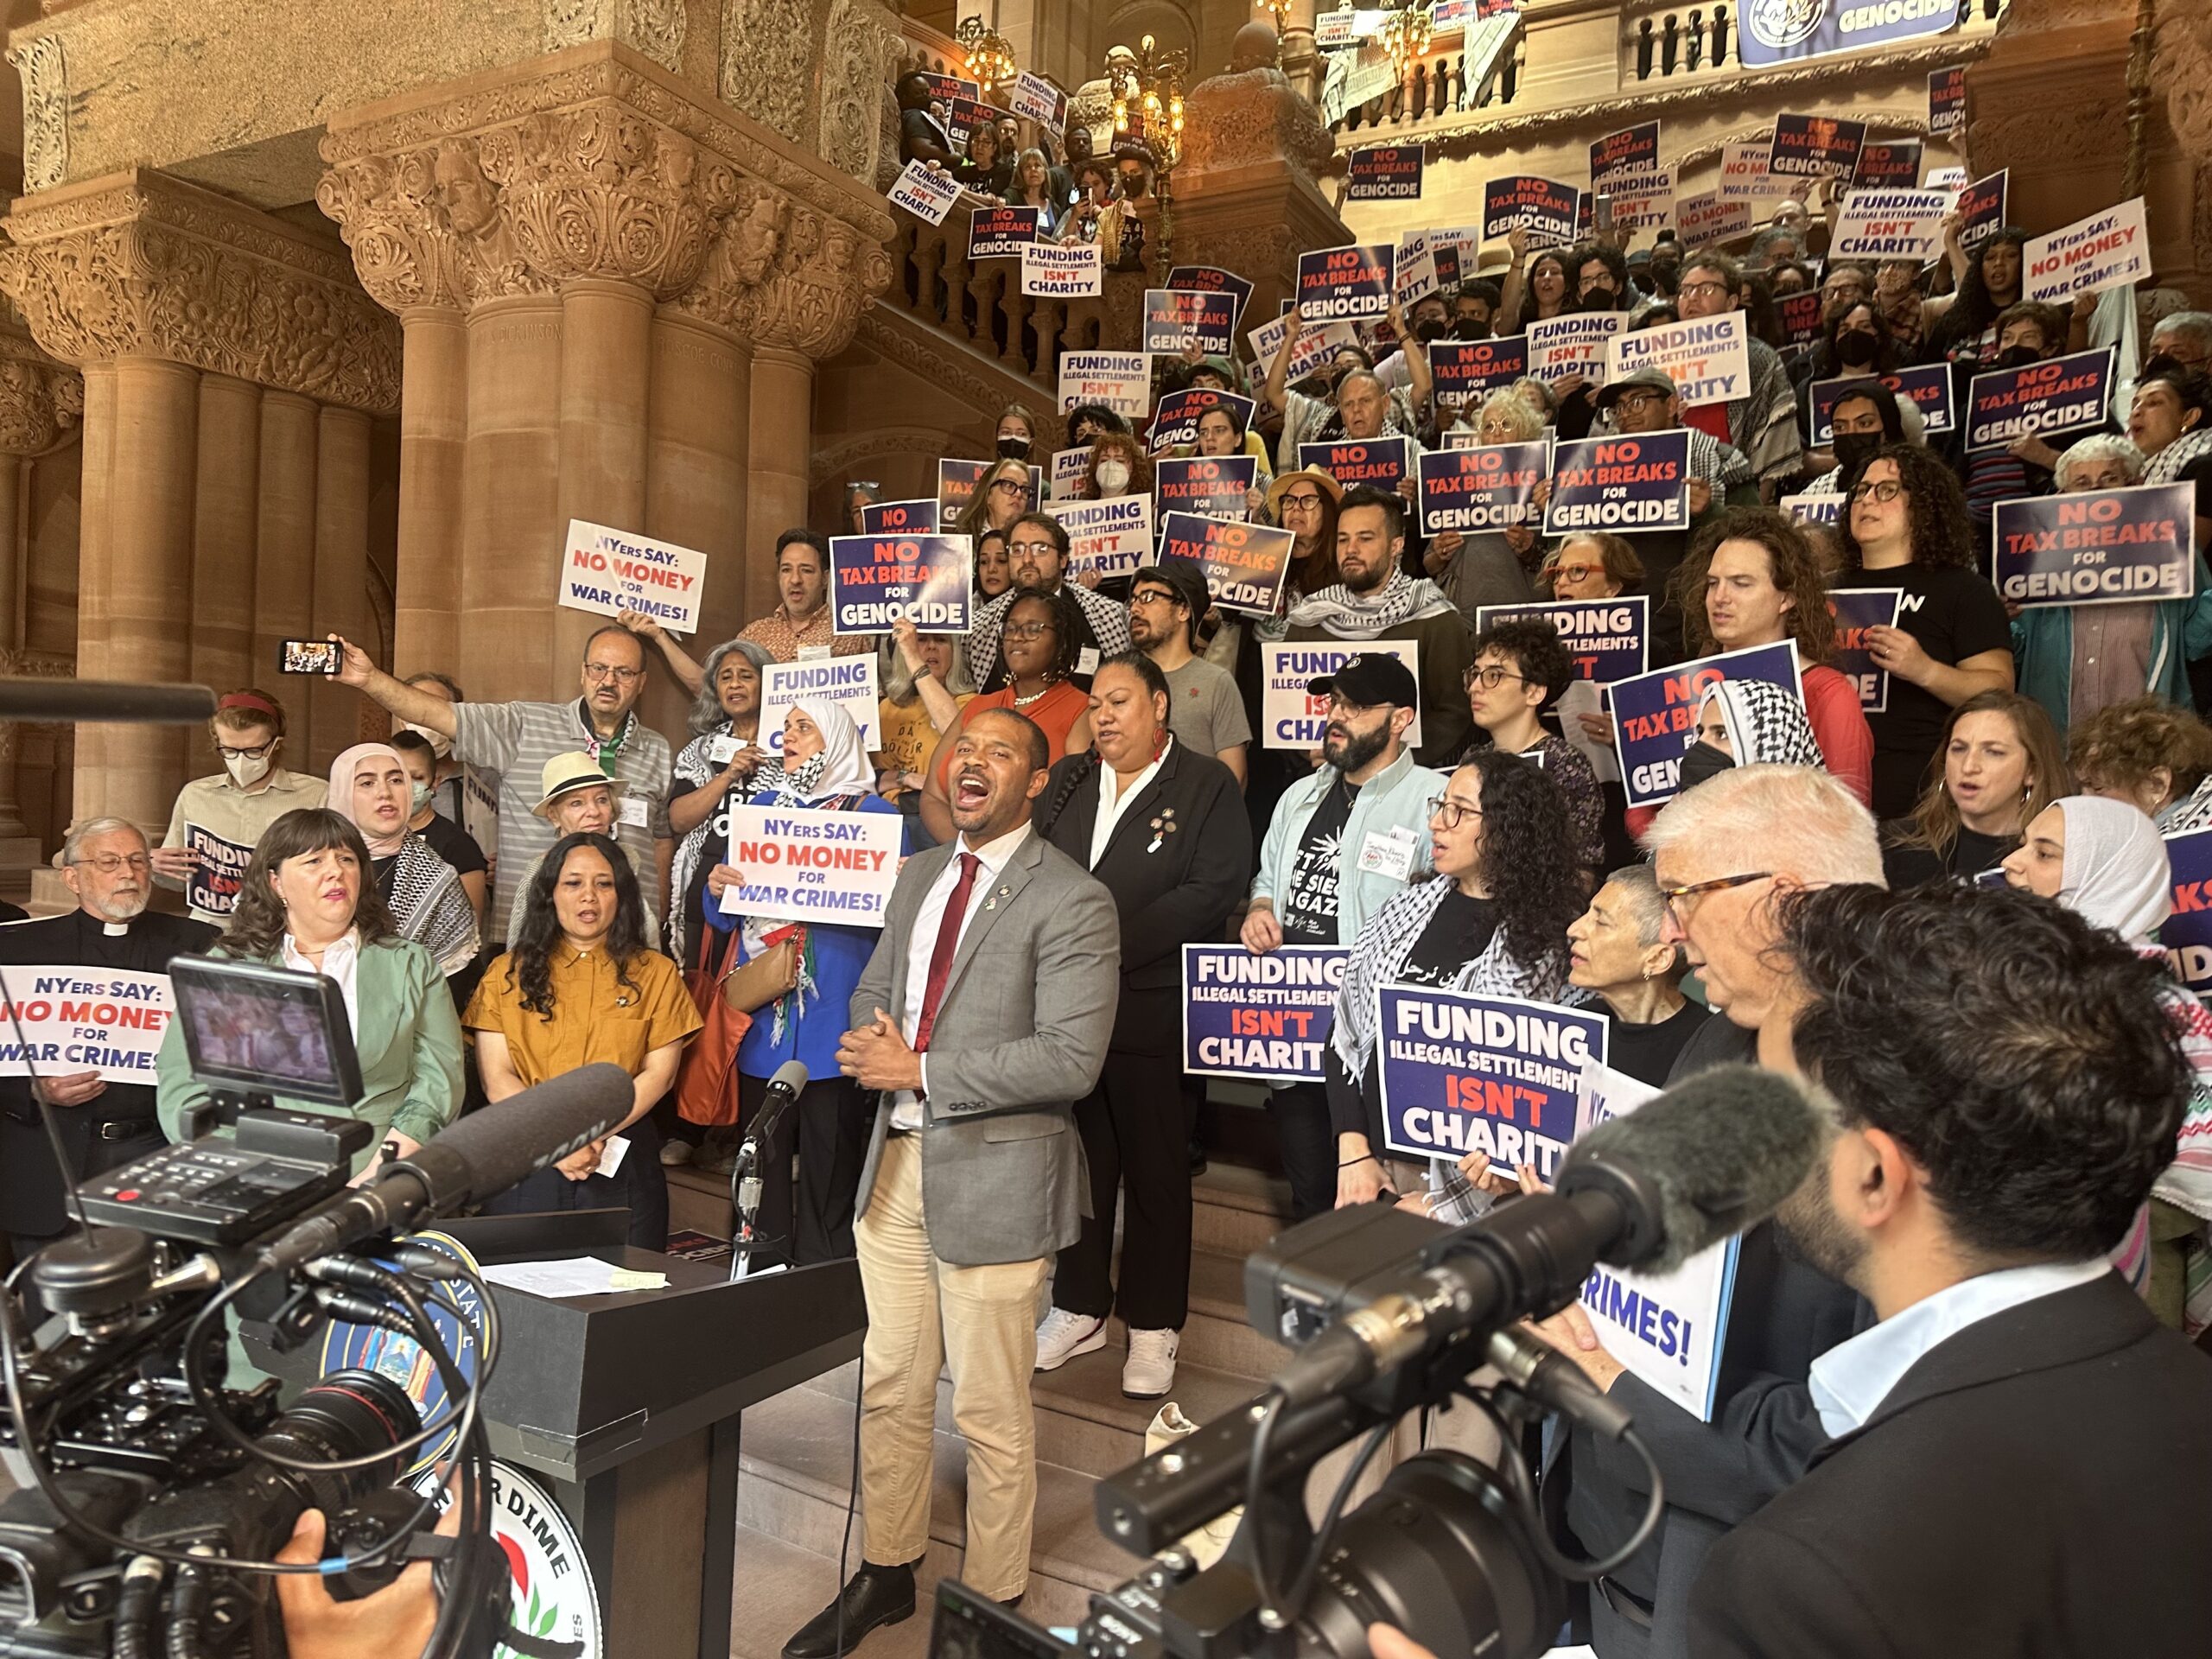 State Senator Jabari Brisport today joined fellow Democratic Socialist lawmakers in support of a bill that seeks to restrict charitable donations to organizations that lawmakers say participate in war crimes.